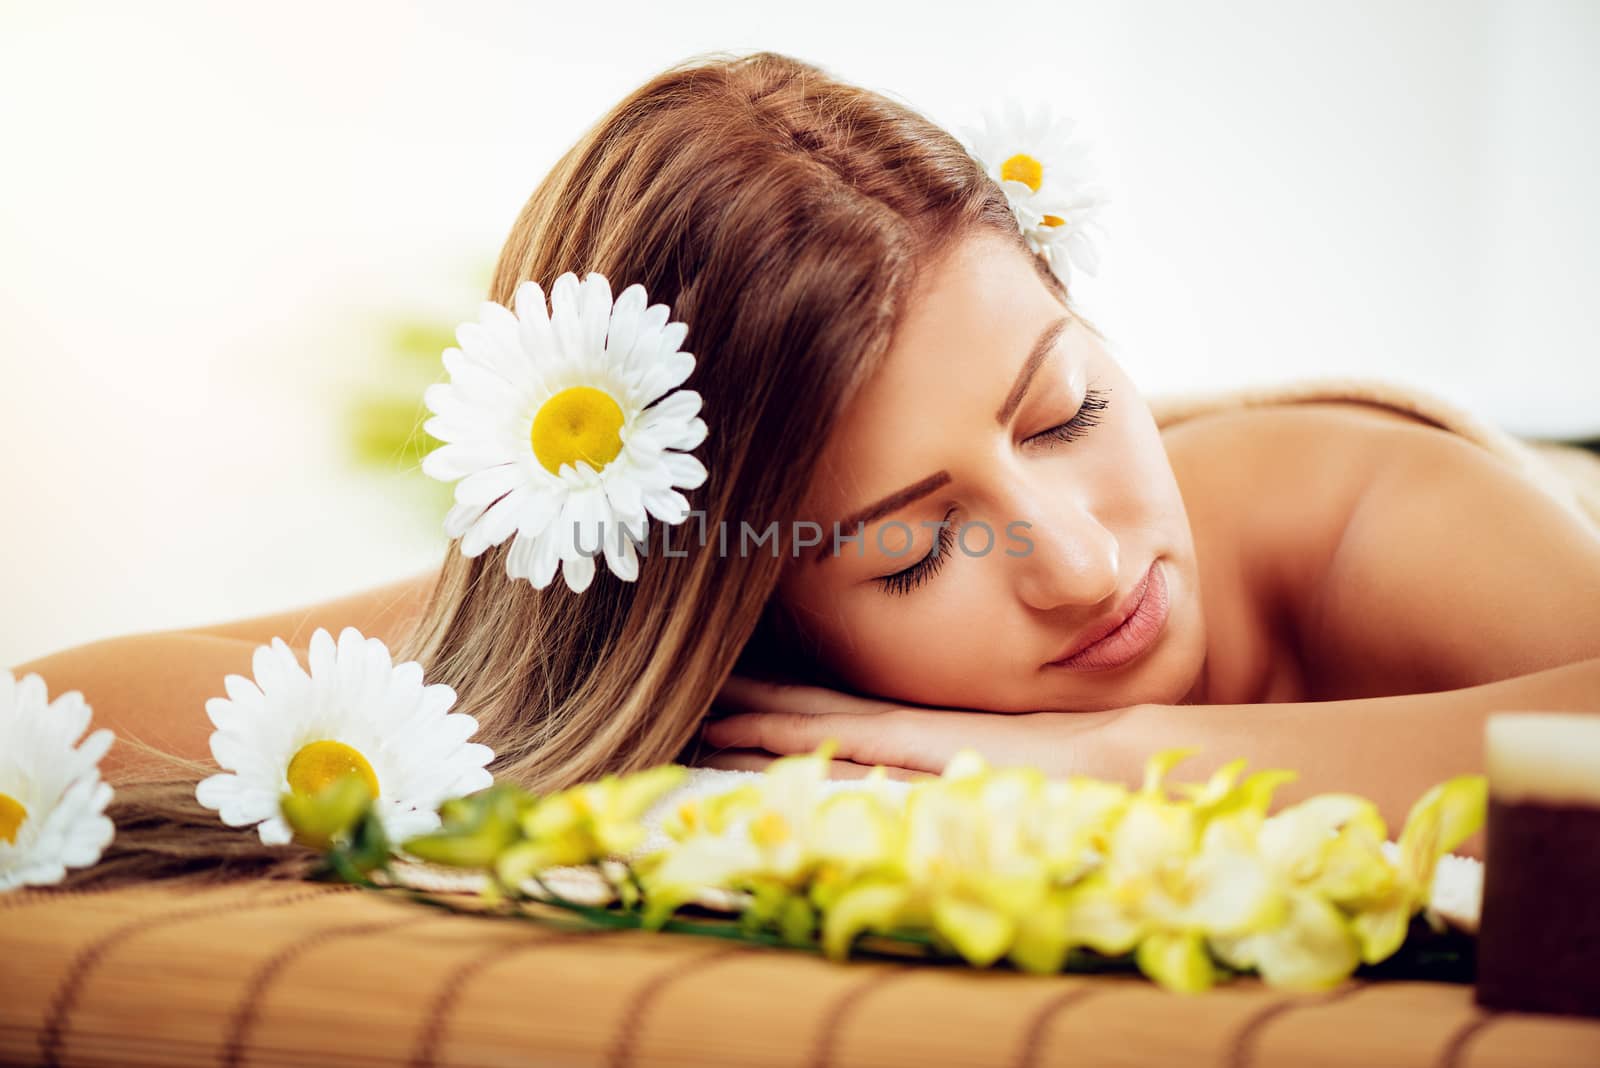 Beautiful young woman enjoying during a skincare treatment at a spa. She is relaxing with eyes closed. 